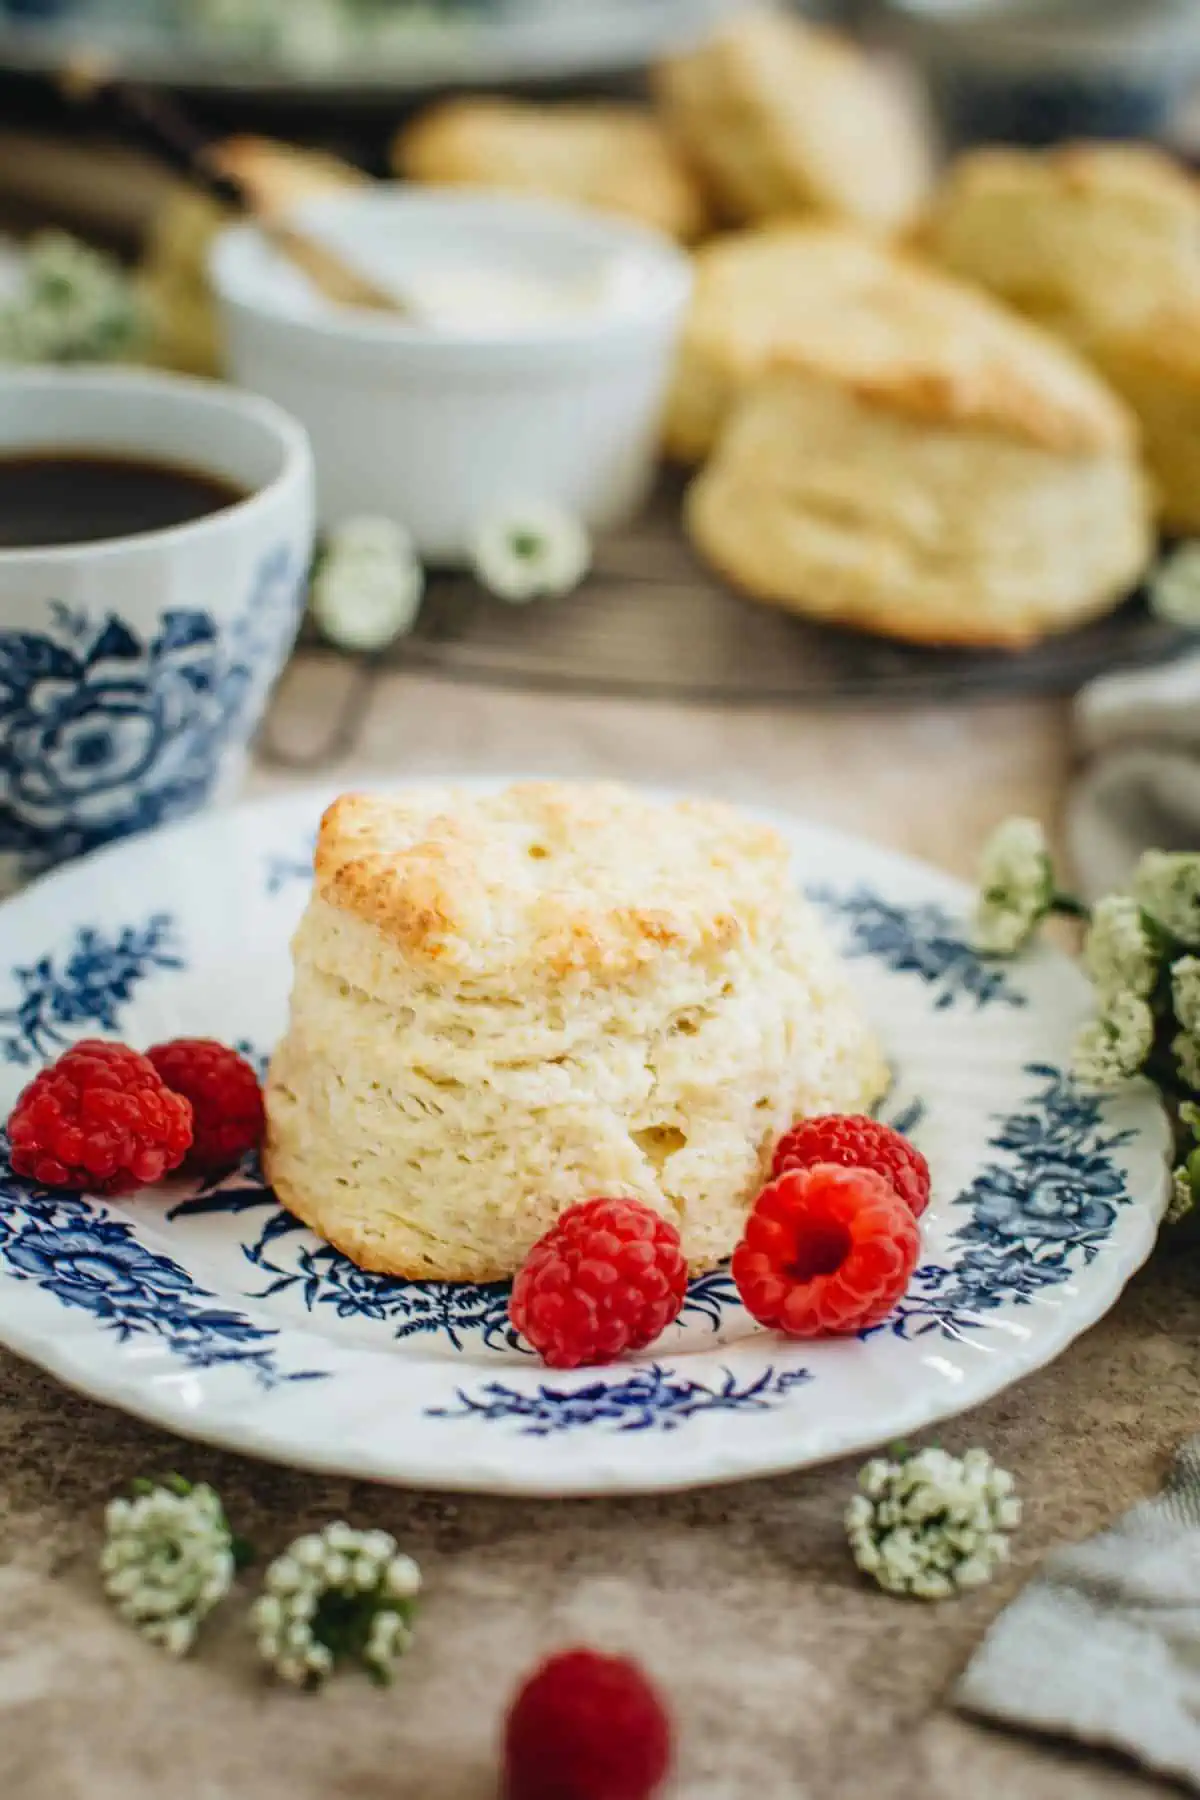 English scone on a blue and white floral bread plate with raspberries around it.